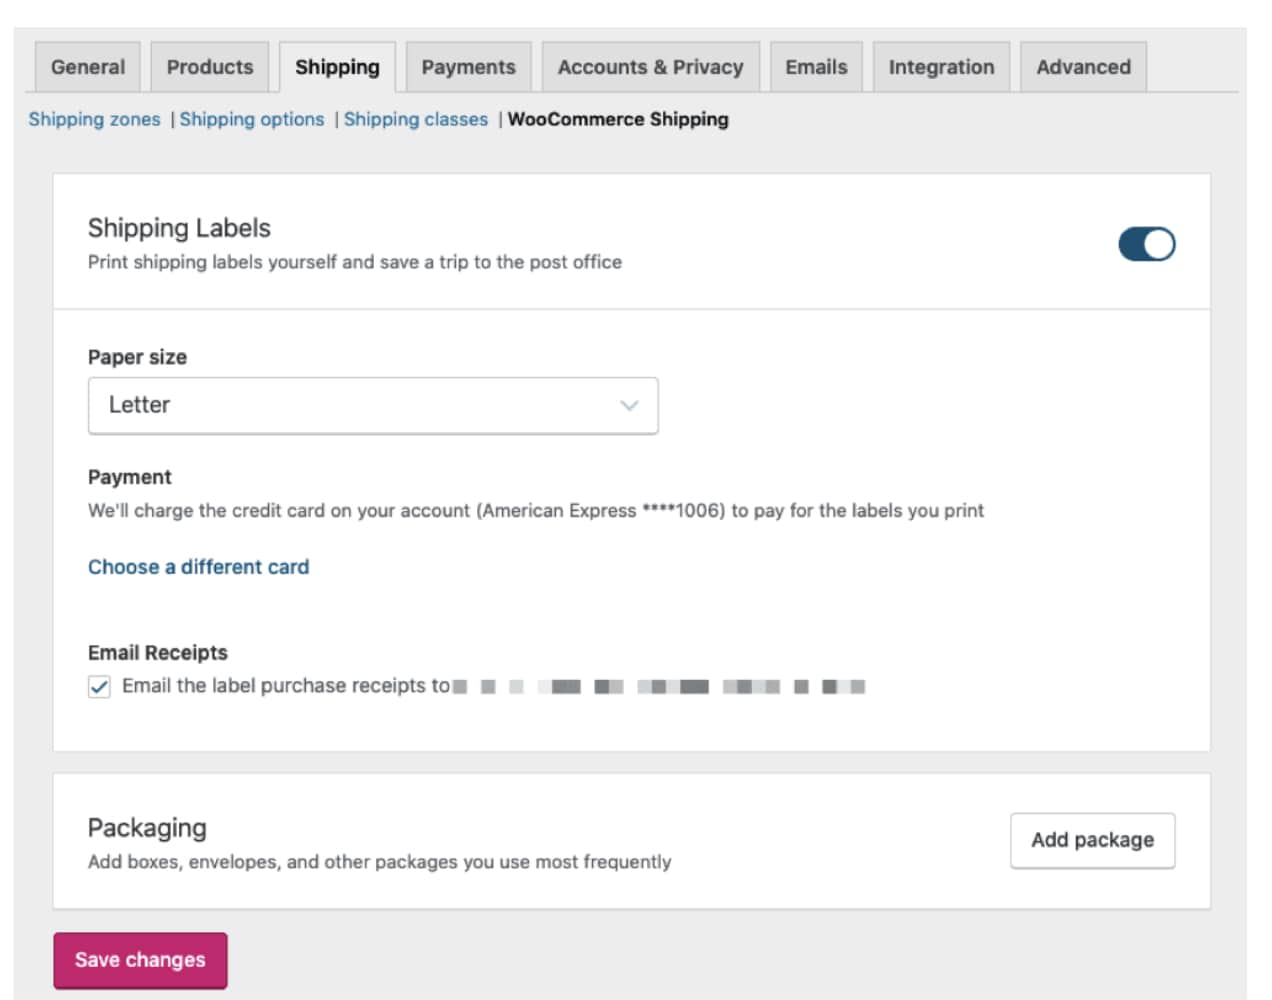 generating shipping labels with WooCommerce Shipping